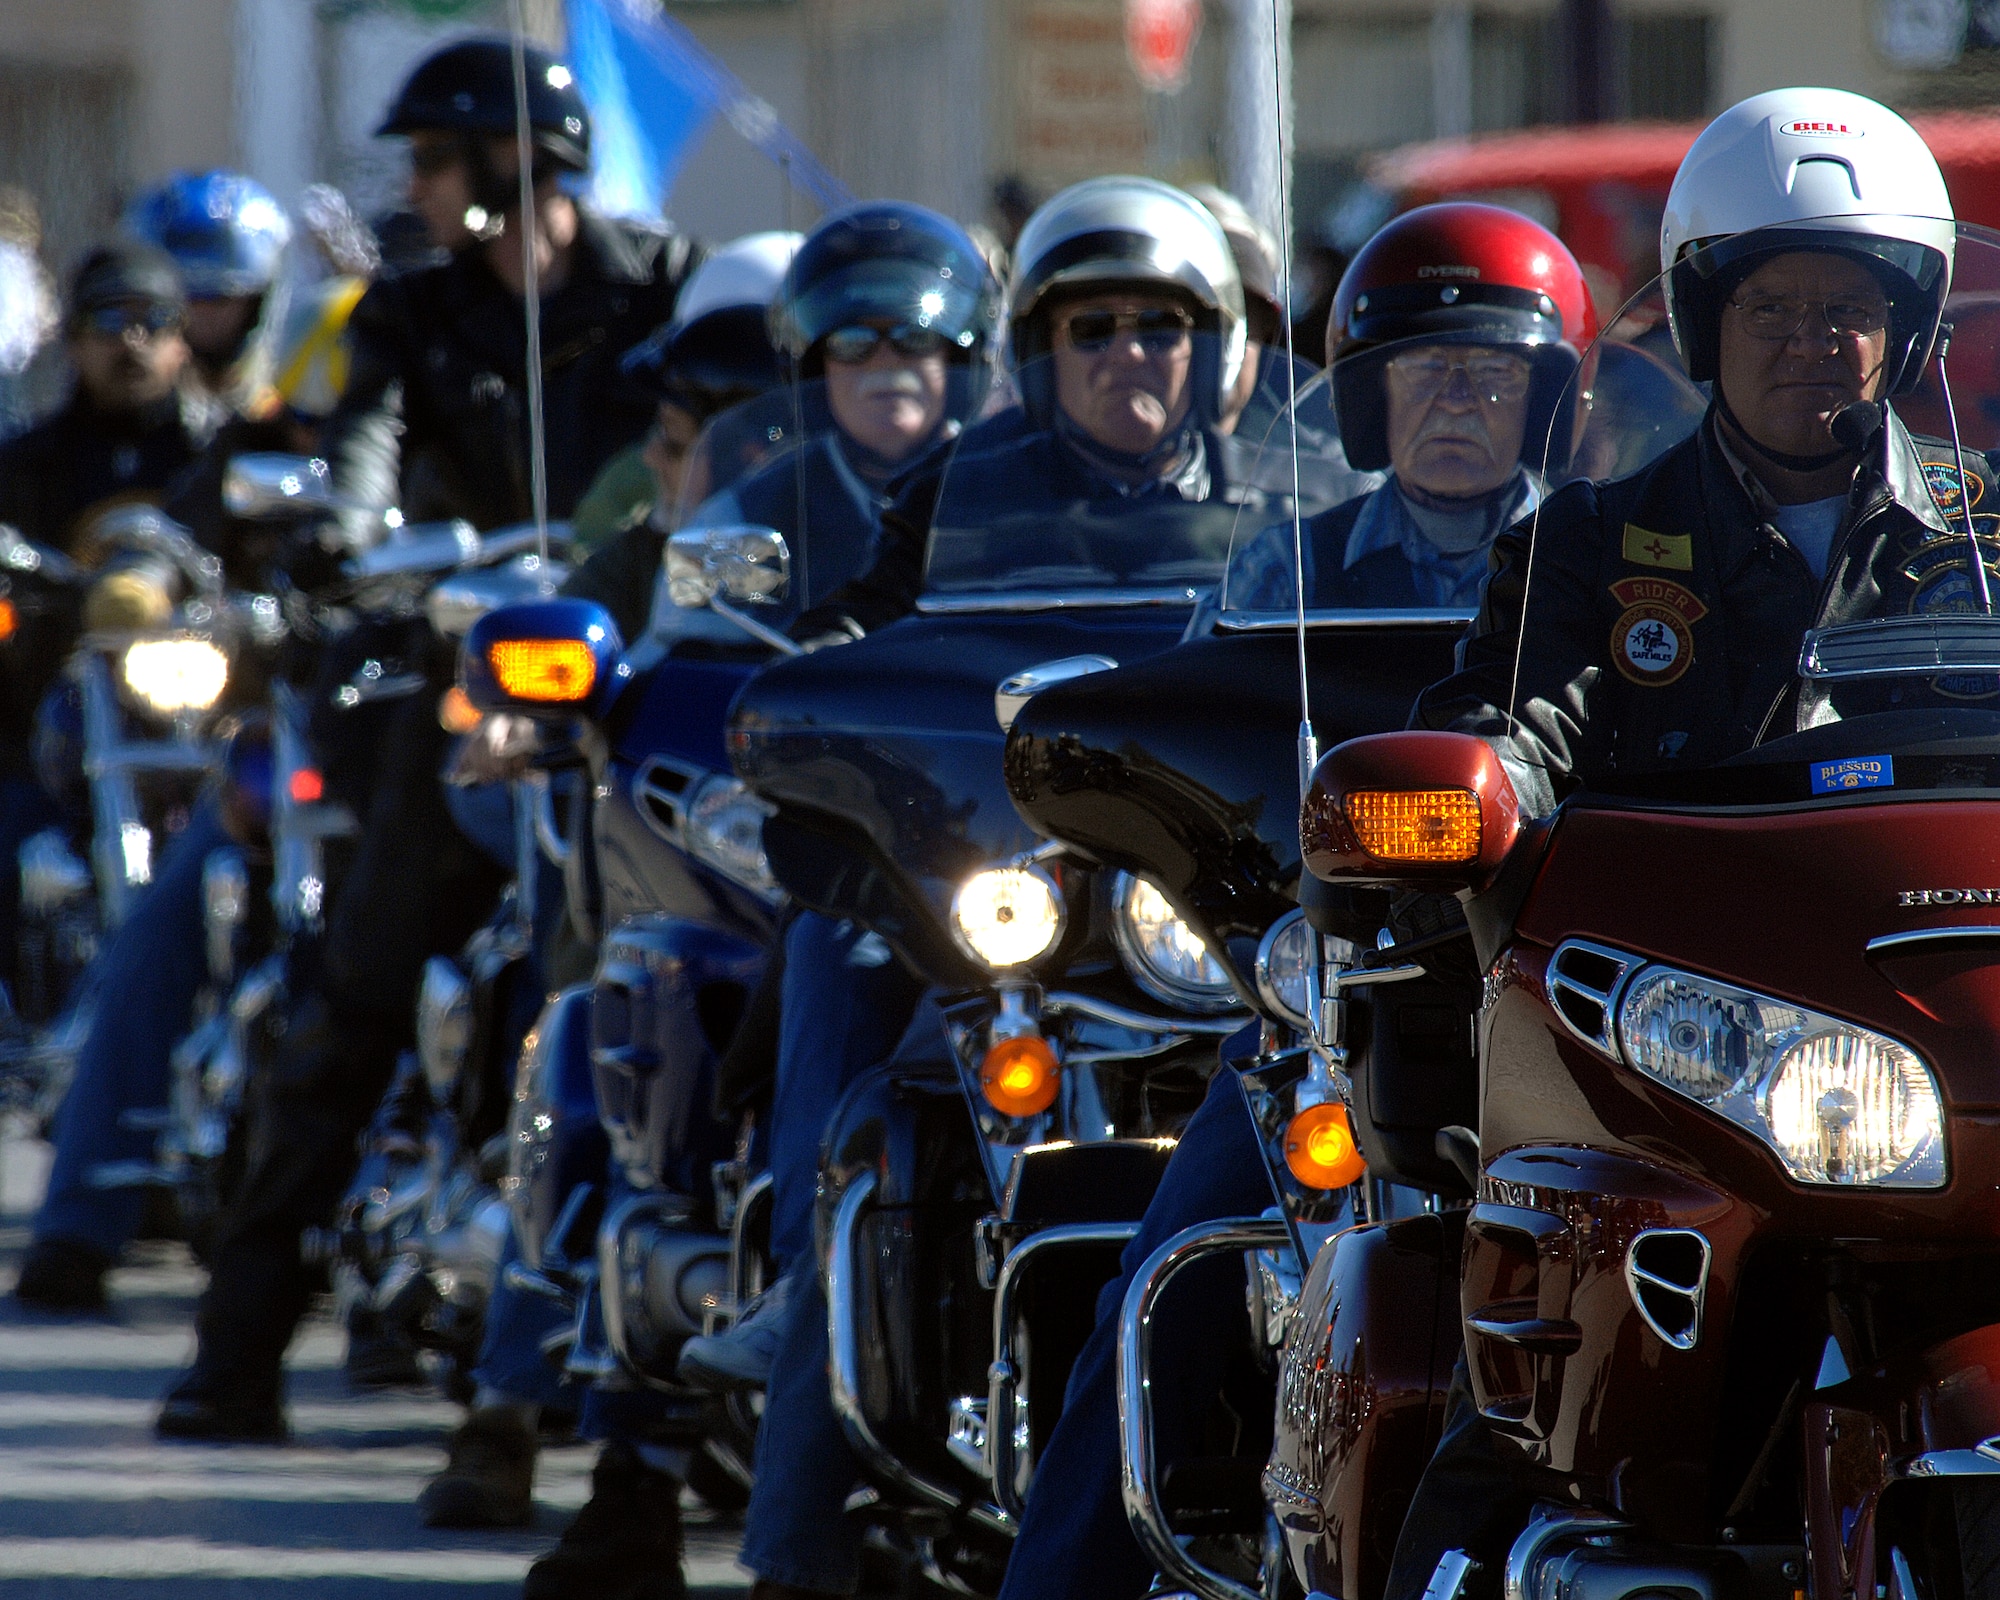 A group of retired and active duty military members ride their motocyles in the Veterans Day parade, Nov. 8, in Alamogordo, N.M. Veterans Day is to honor America's fallen heroes, veterans and members who continue to serve. The Veterans Day National Ceremony is held Nov. 11 each year at Arlington National Cemetery.



(U.S. Air Force photo/ Senior Airman Anthony Nelson)
